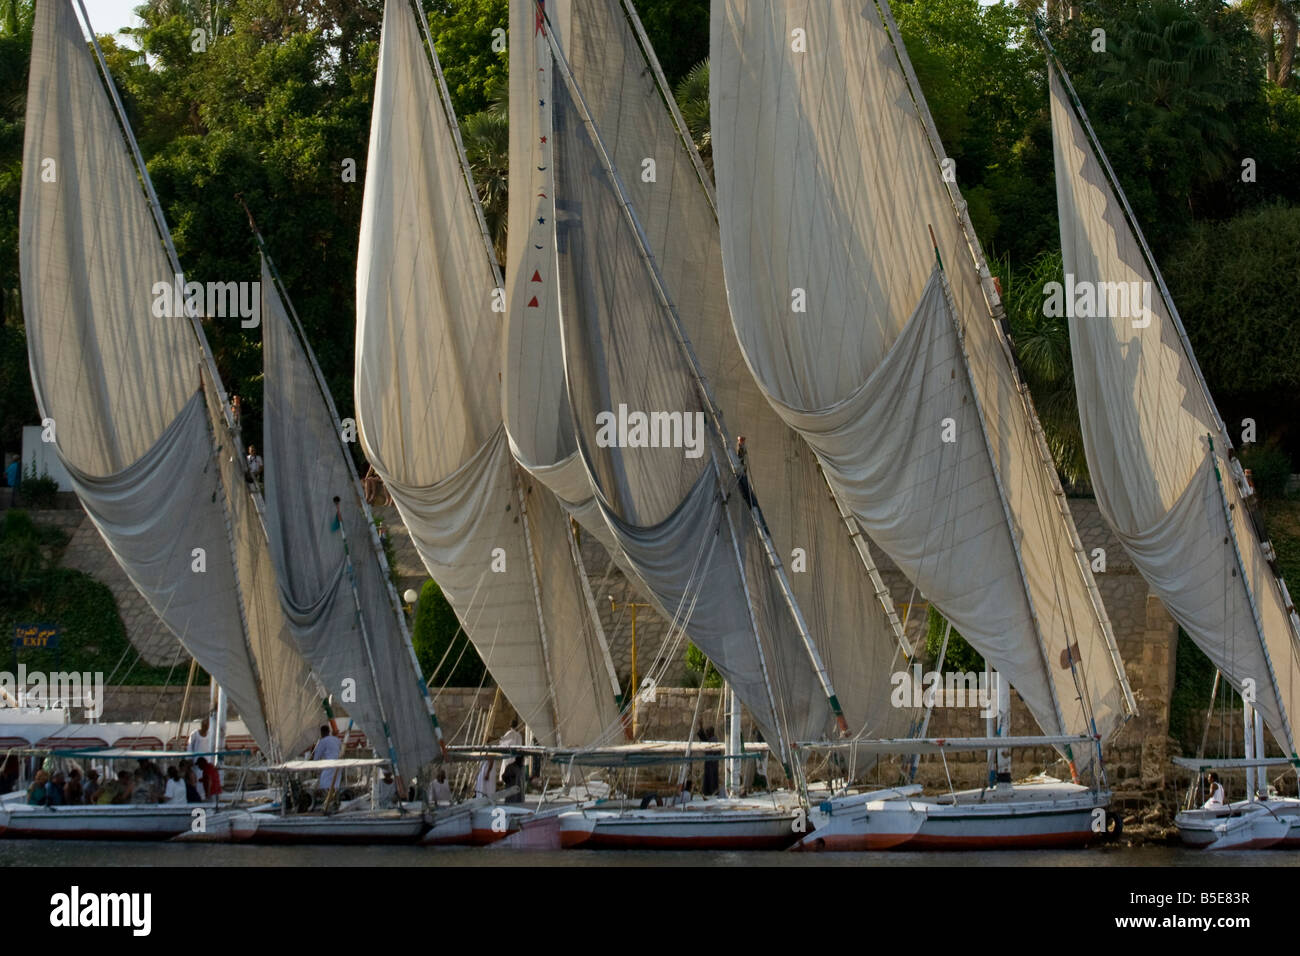 Felucca Sailboats Docked on the Nile River in Aswan Egypt Stock Photo